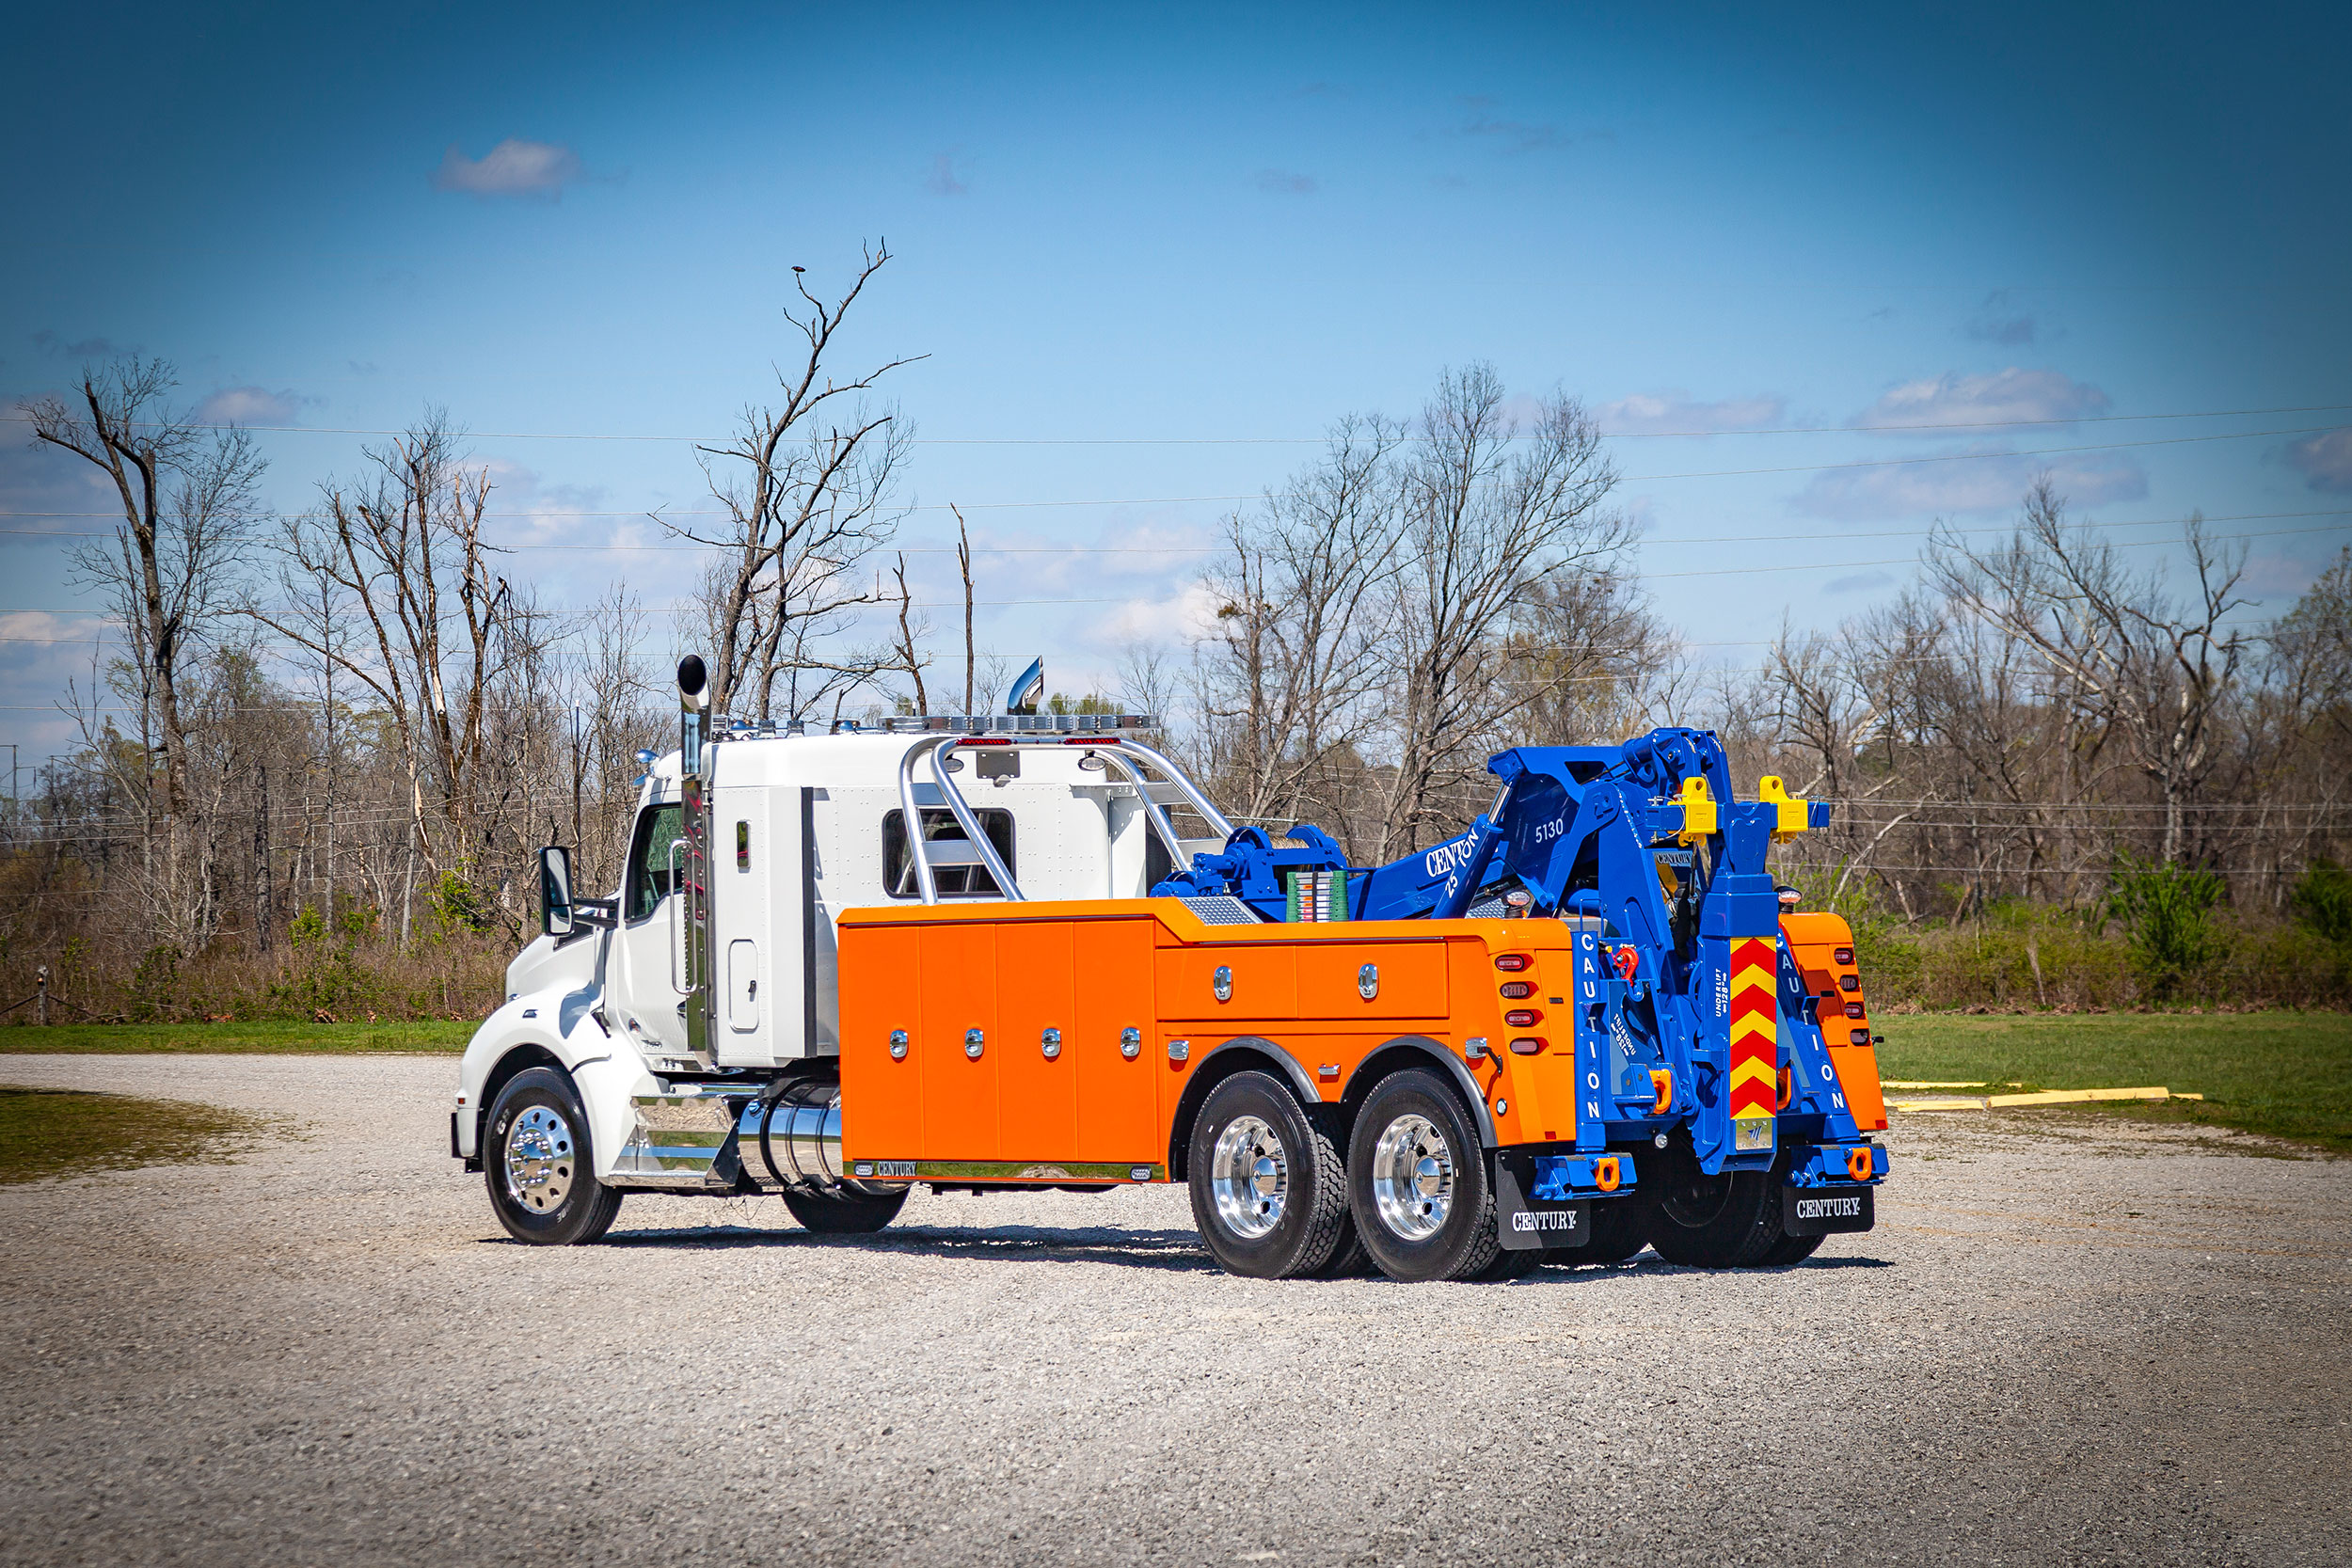 Century 5130 integrated heavy duty wrecker on a kenworth t880 chassis